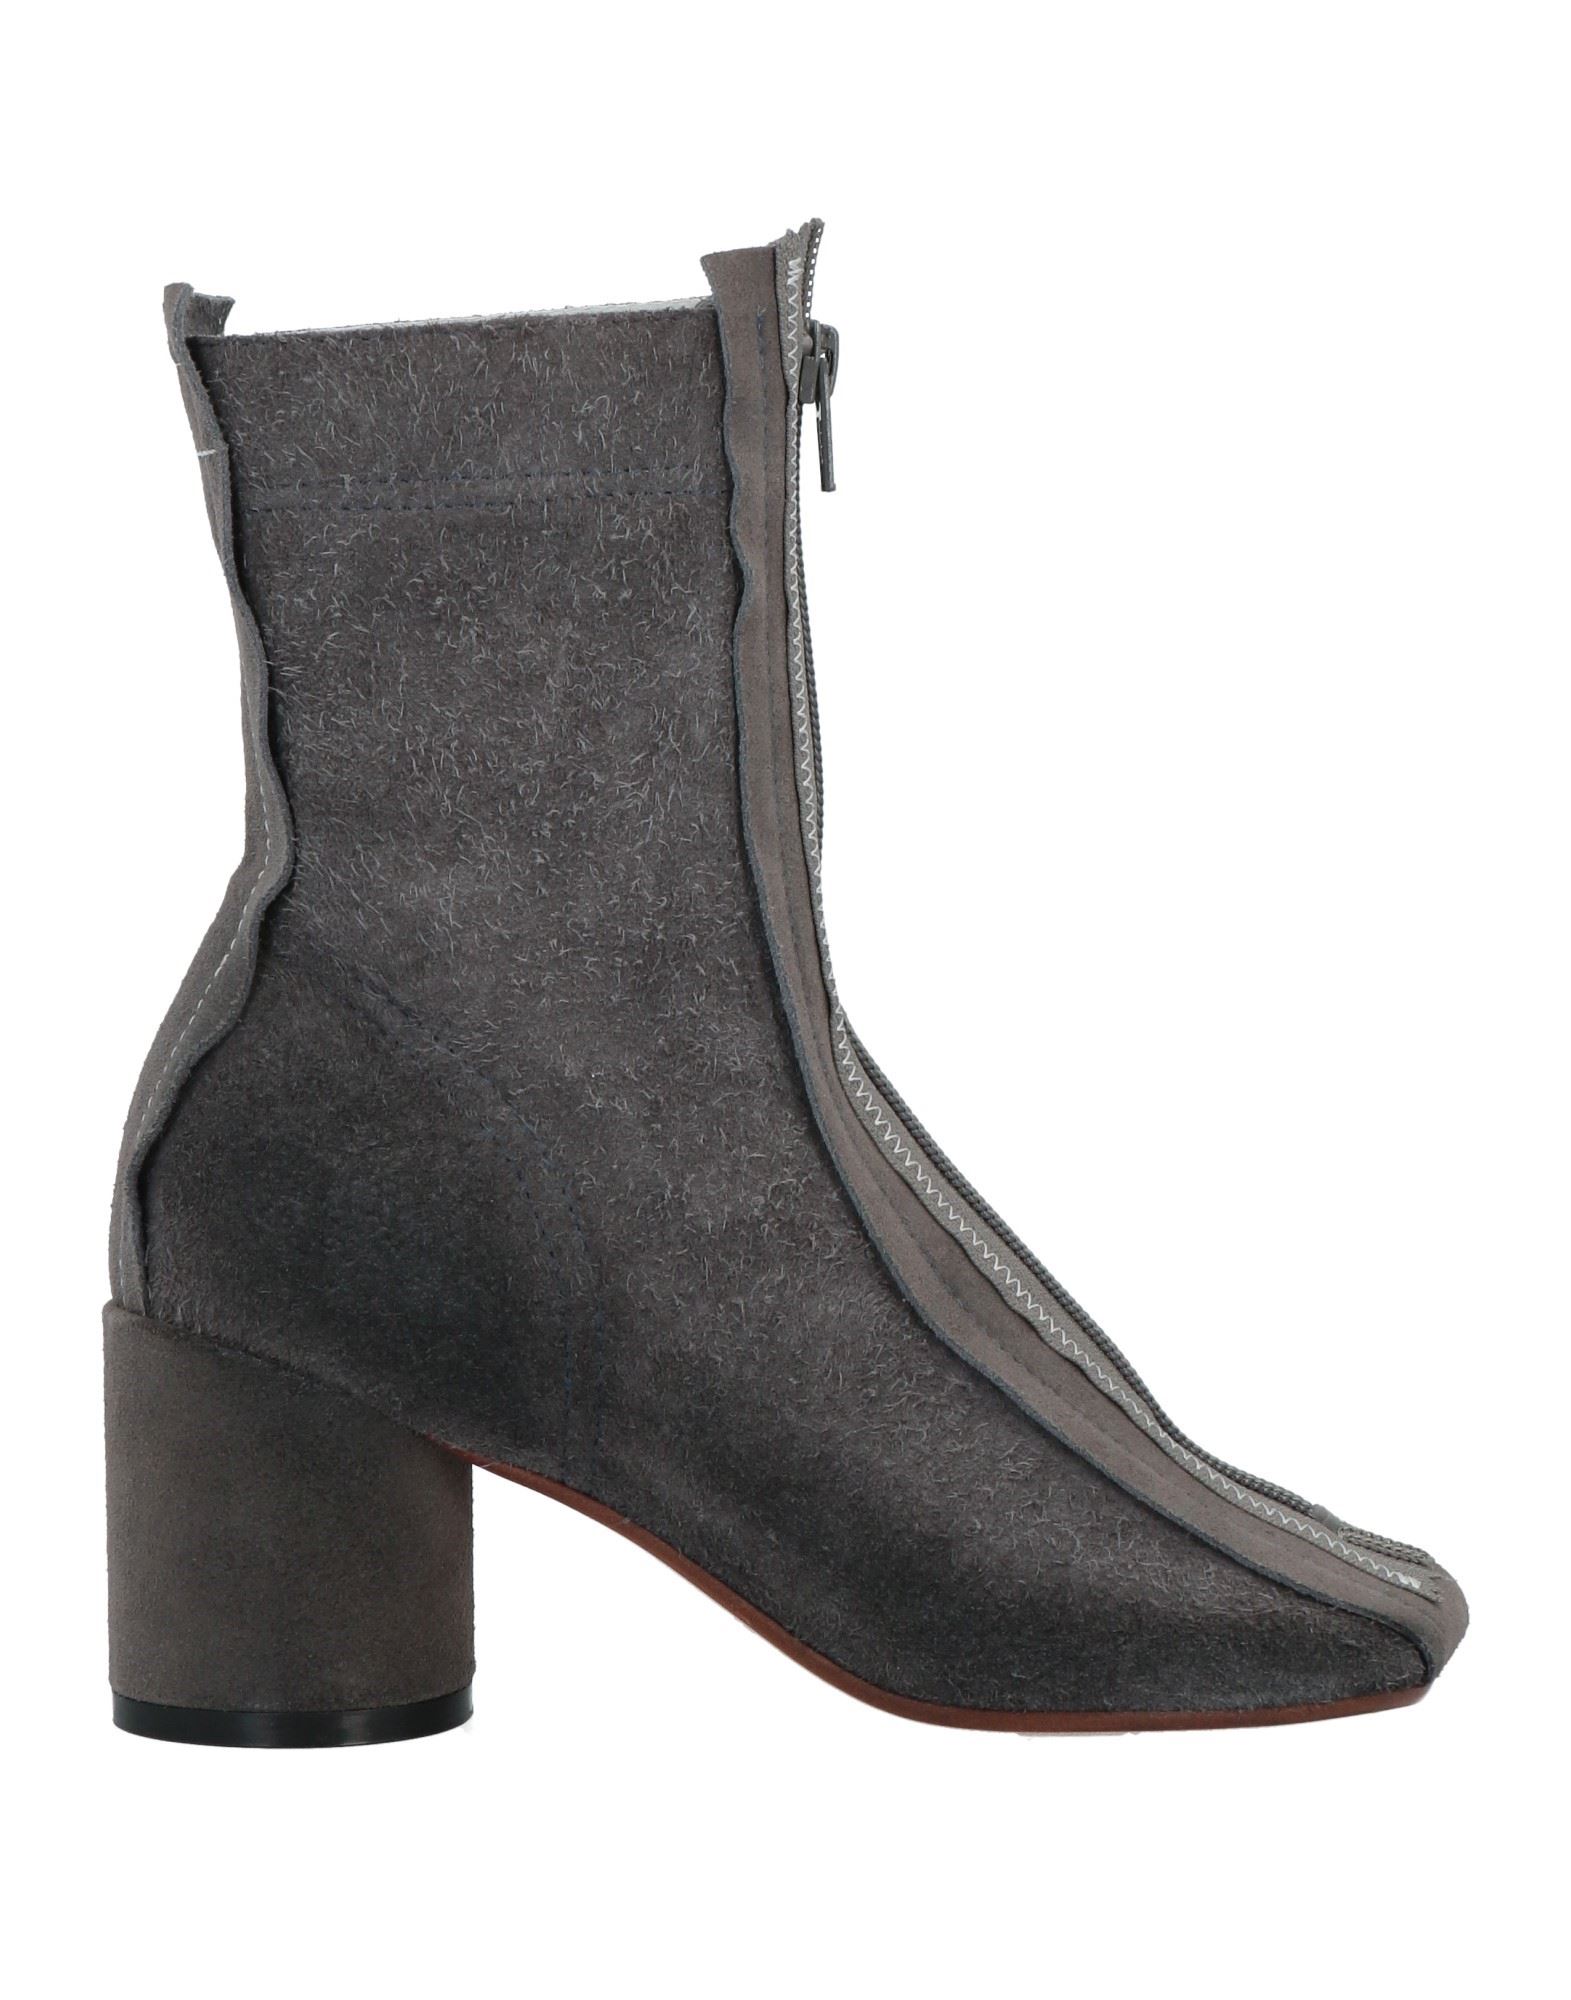 Mm6 Maison Margiela Ankle Boots In Lead